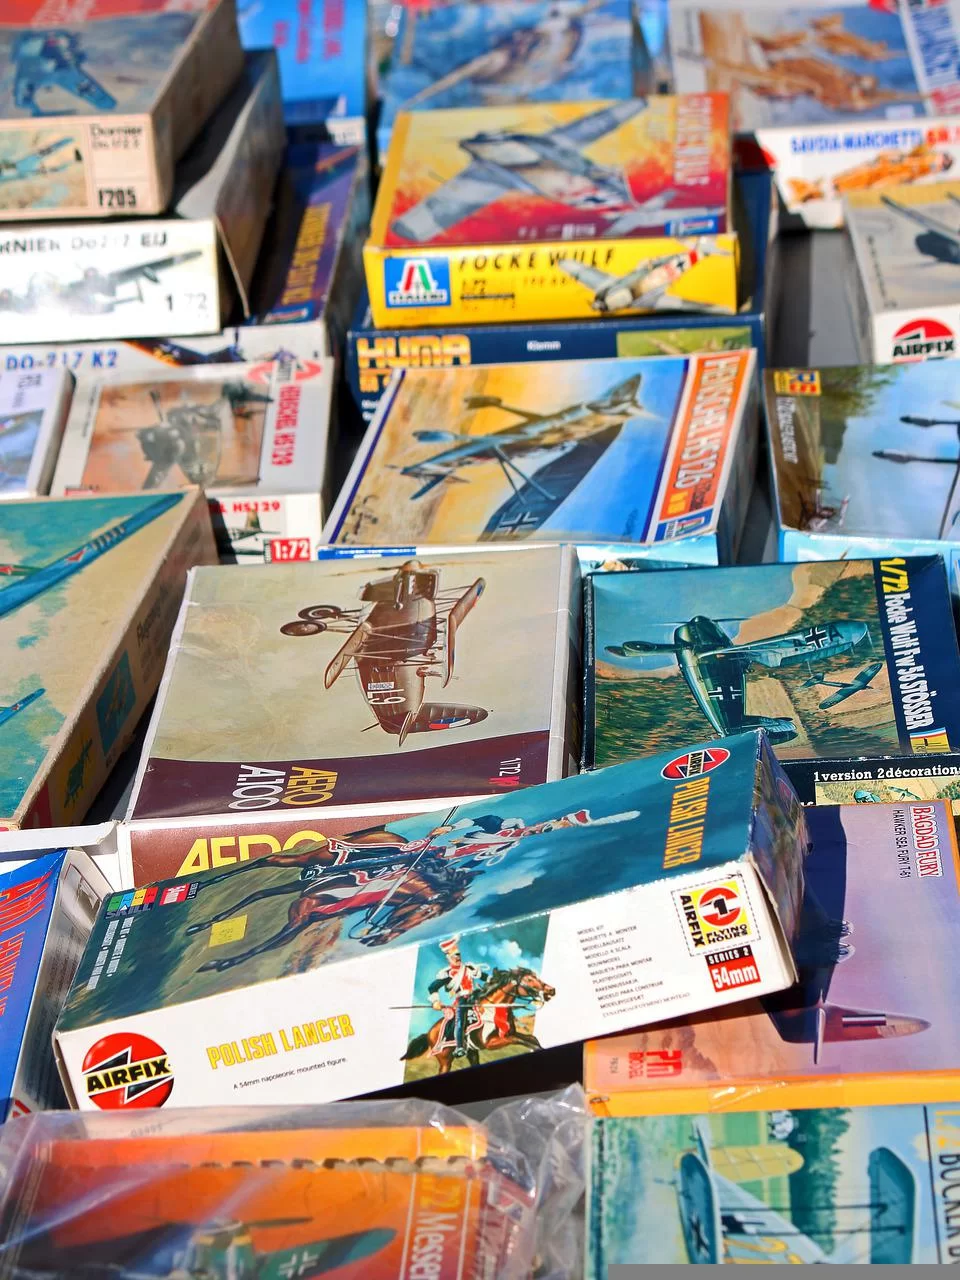 model airplane kits, boxes, colorful-6656899.jpg